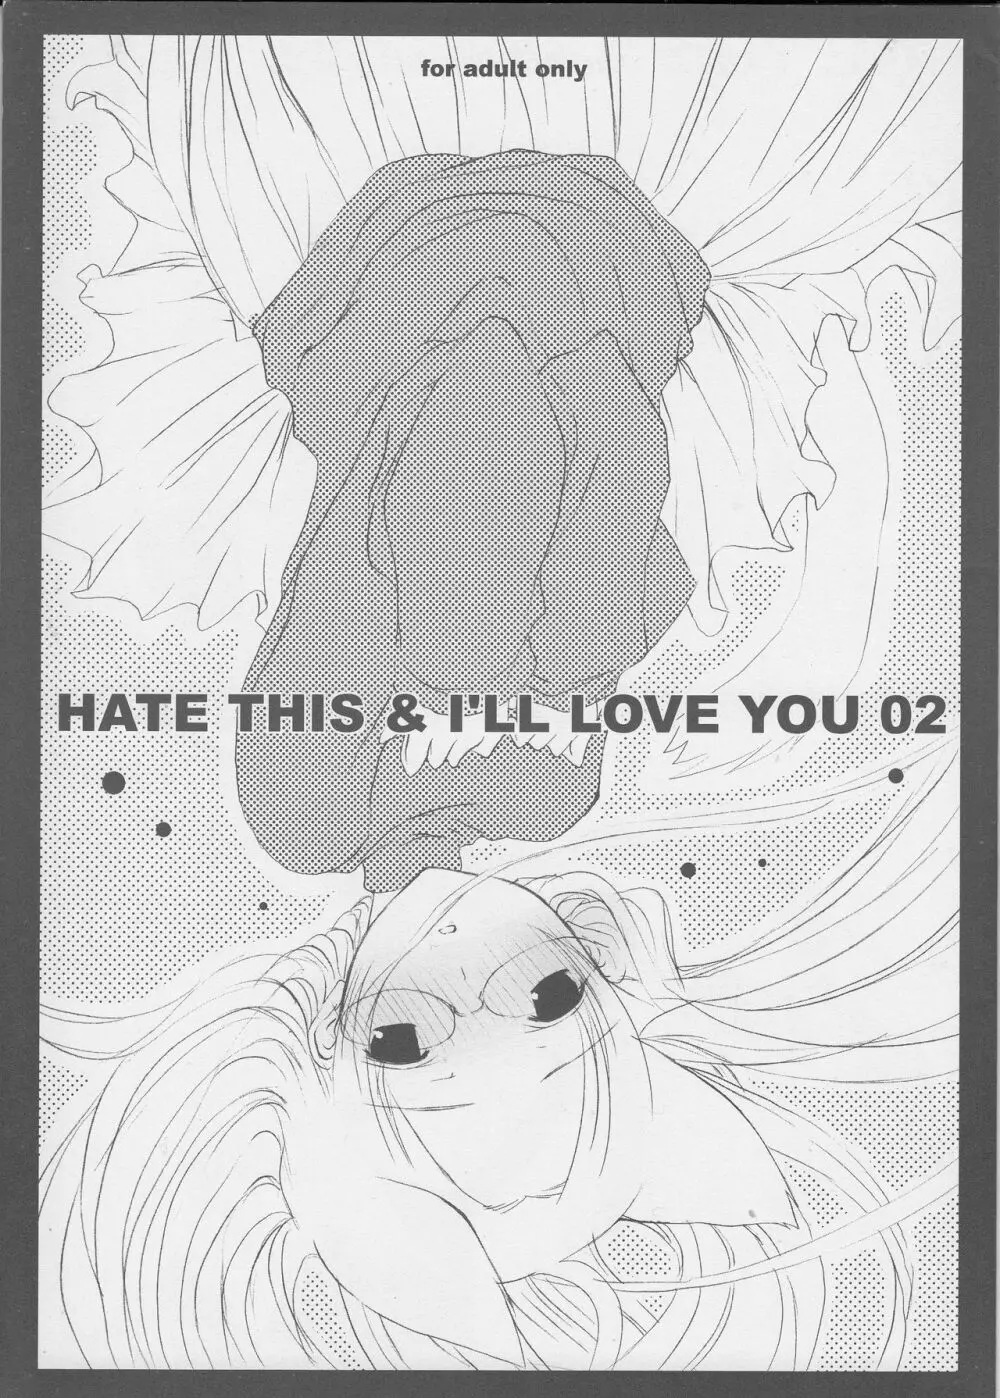 HATE THIS ＆ I’LL LOVE YOU 02 - page1